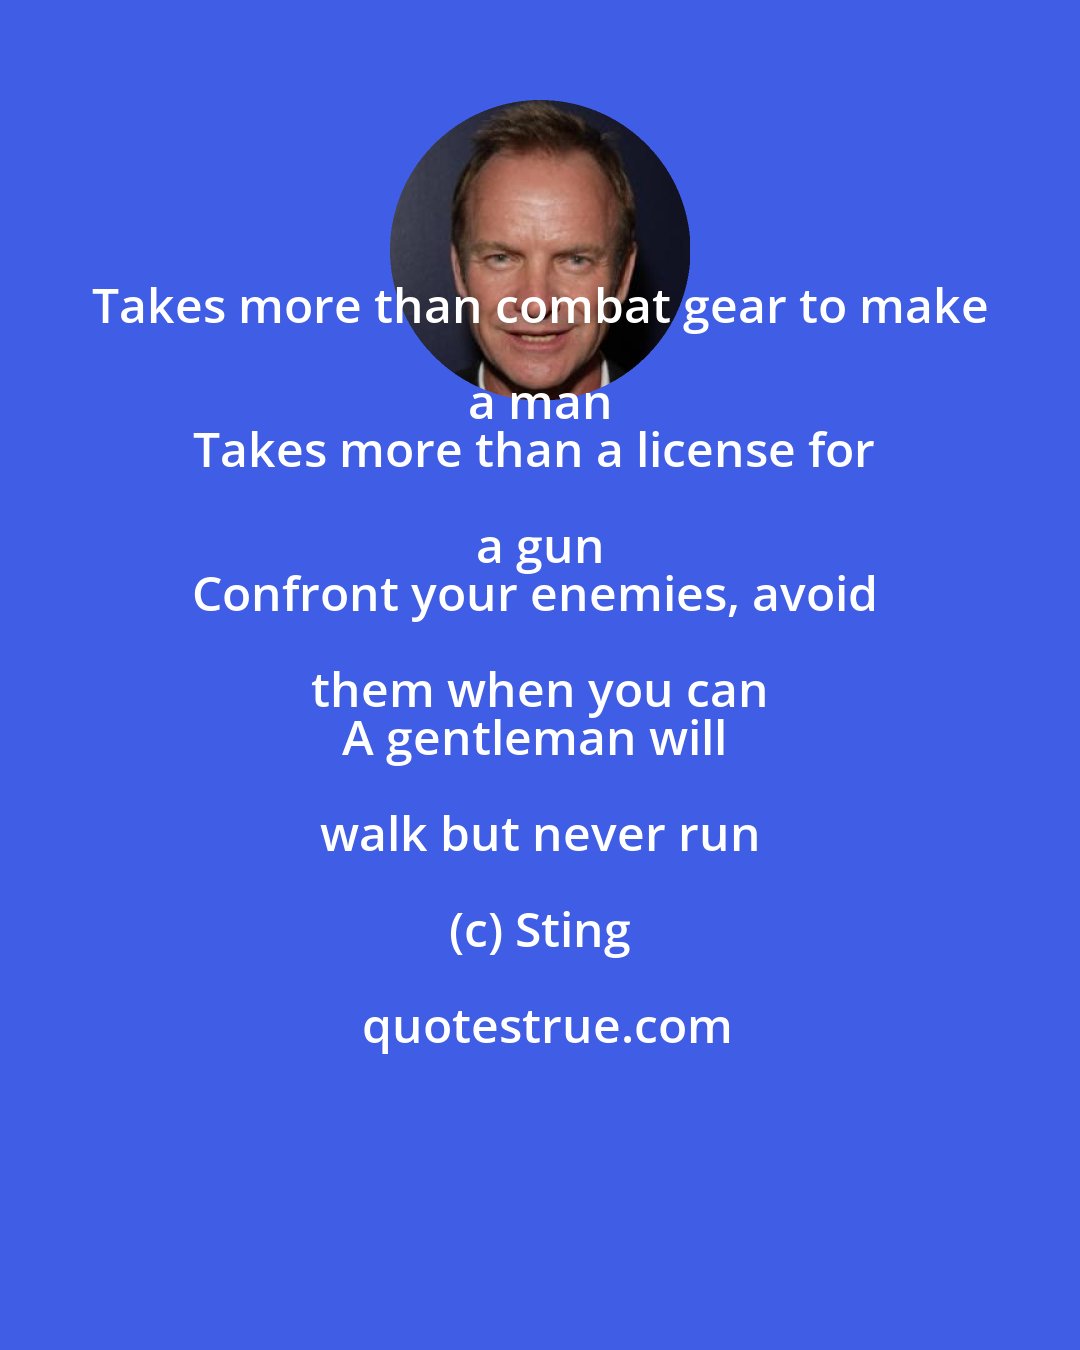 Sting: Takes more than combat gear to make a man 
Takes more than a license for a gun 
Confront your enemies, avoid them when you can 
A gentleman will walk but never run